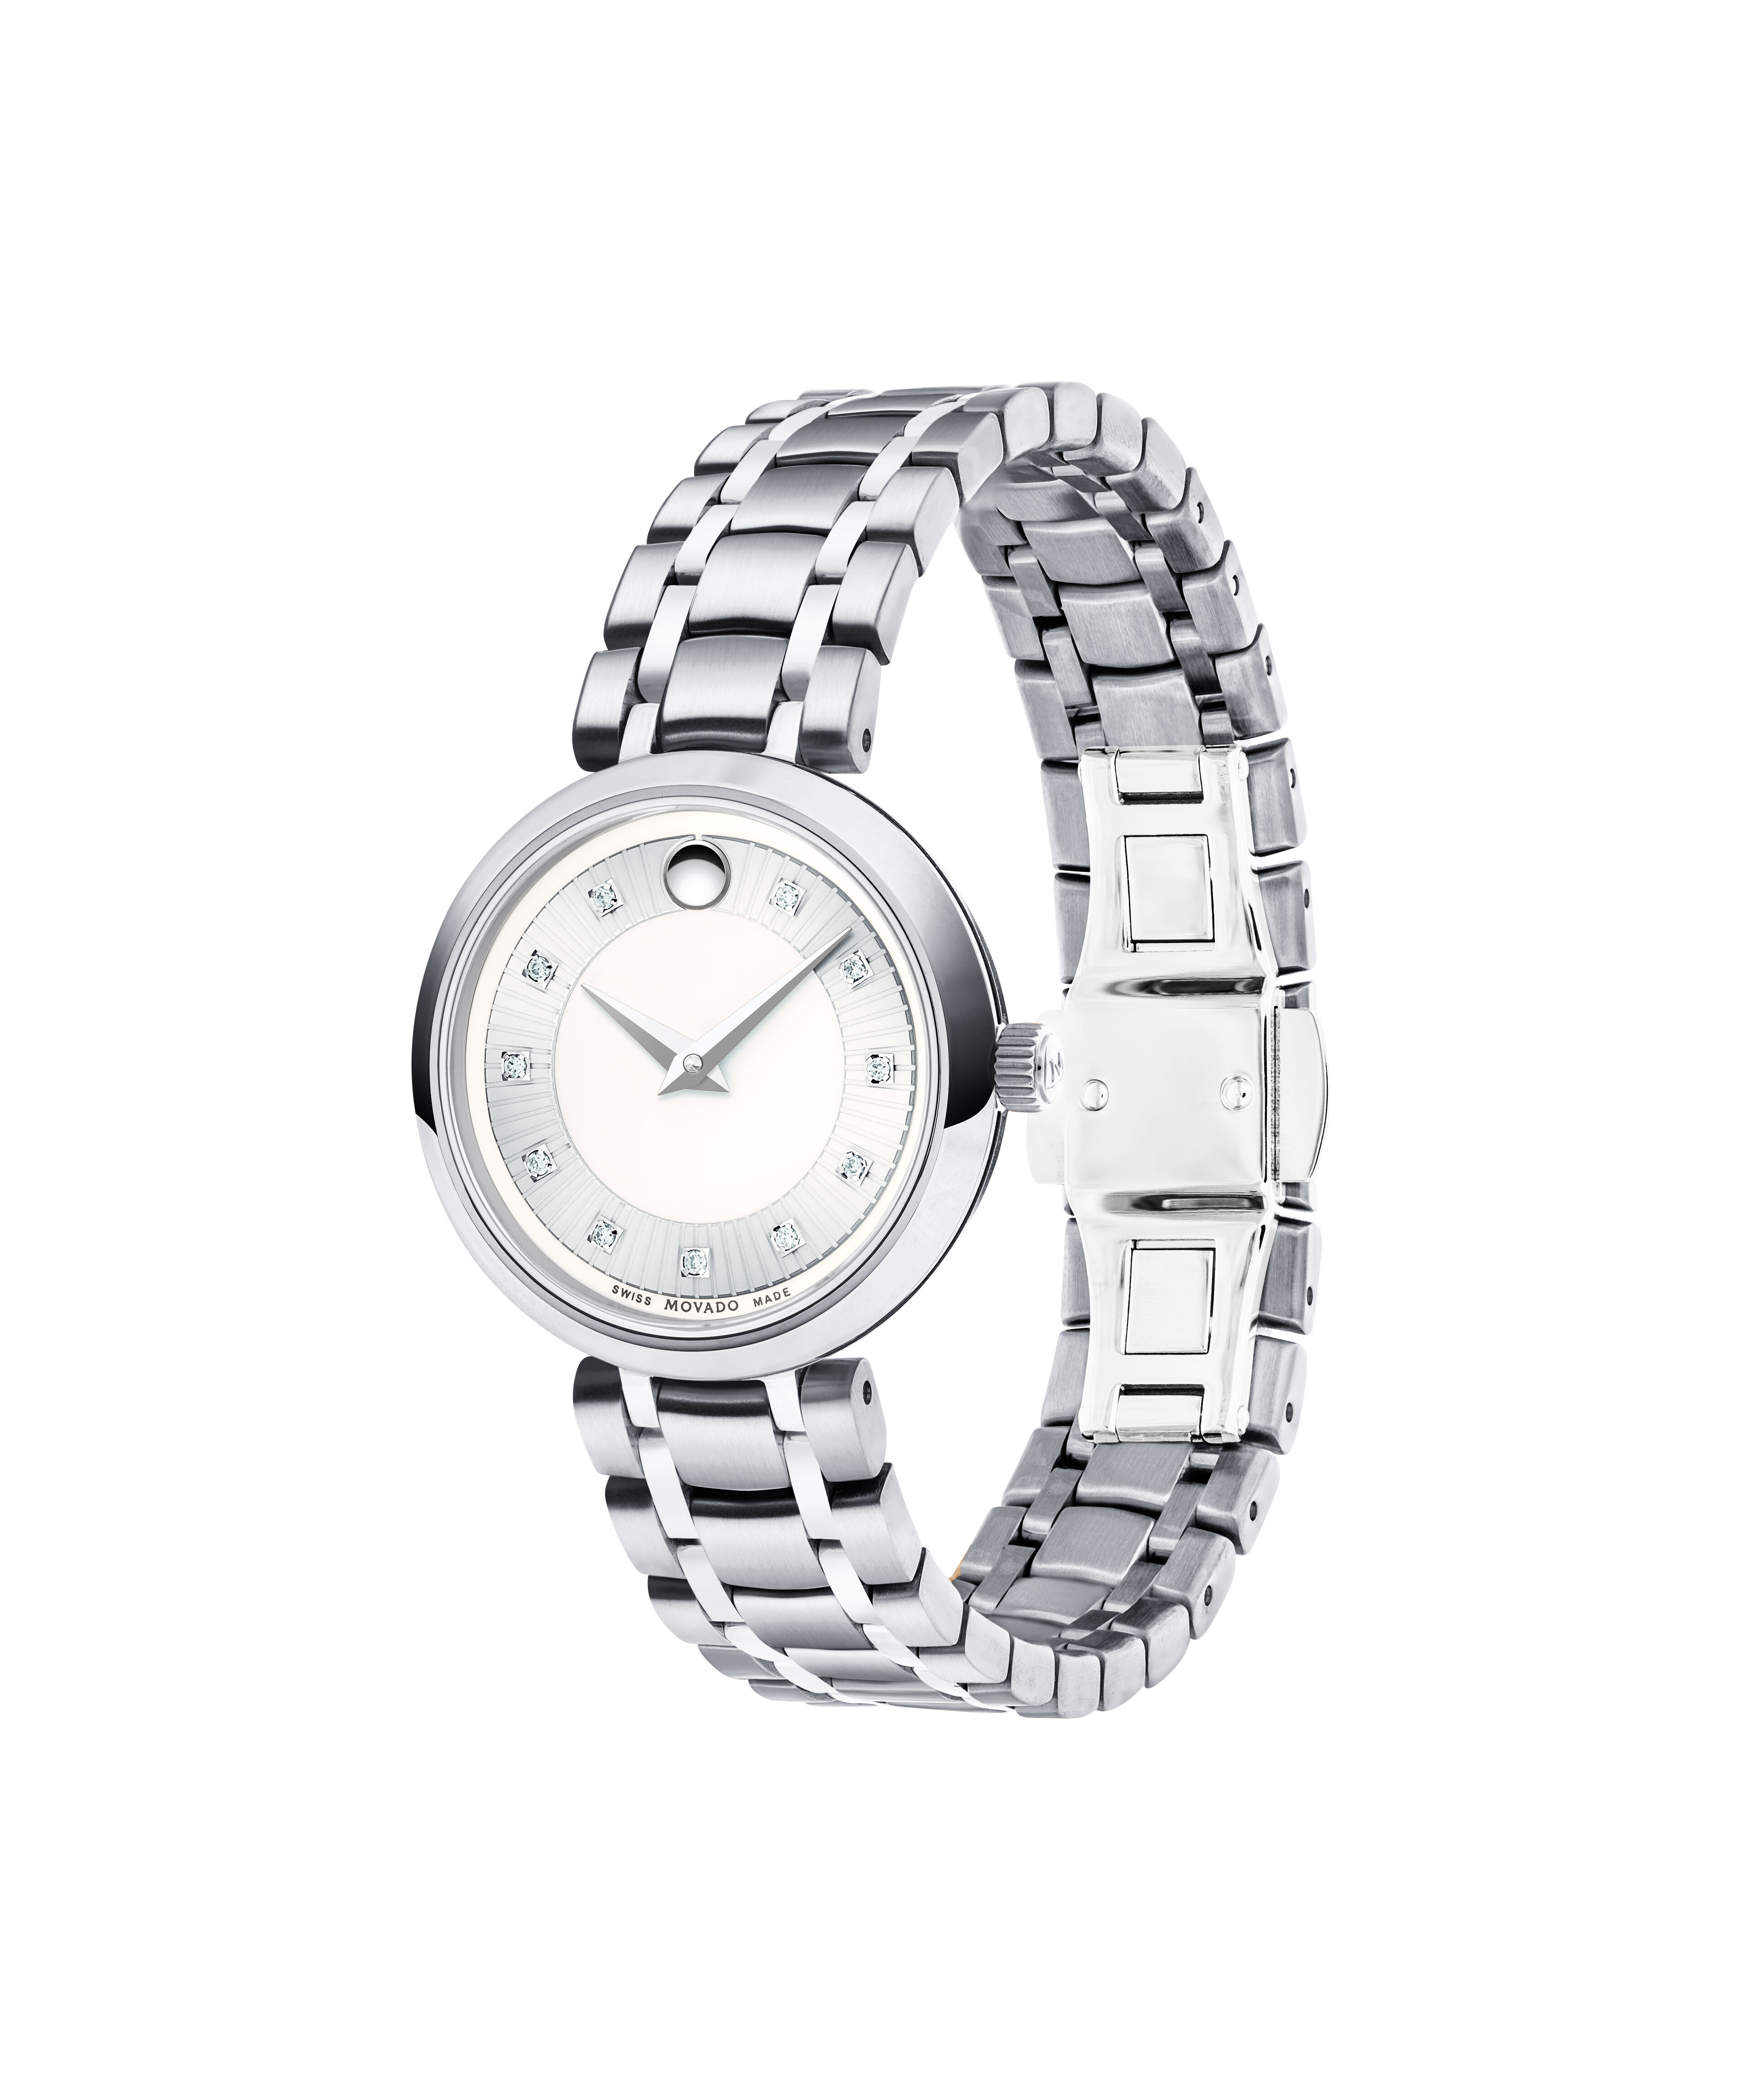 Is An Omega Model 1399L Co-Axial Chronometer Ladies Watch Fake